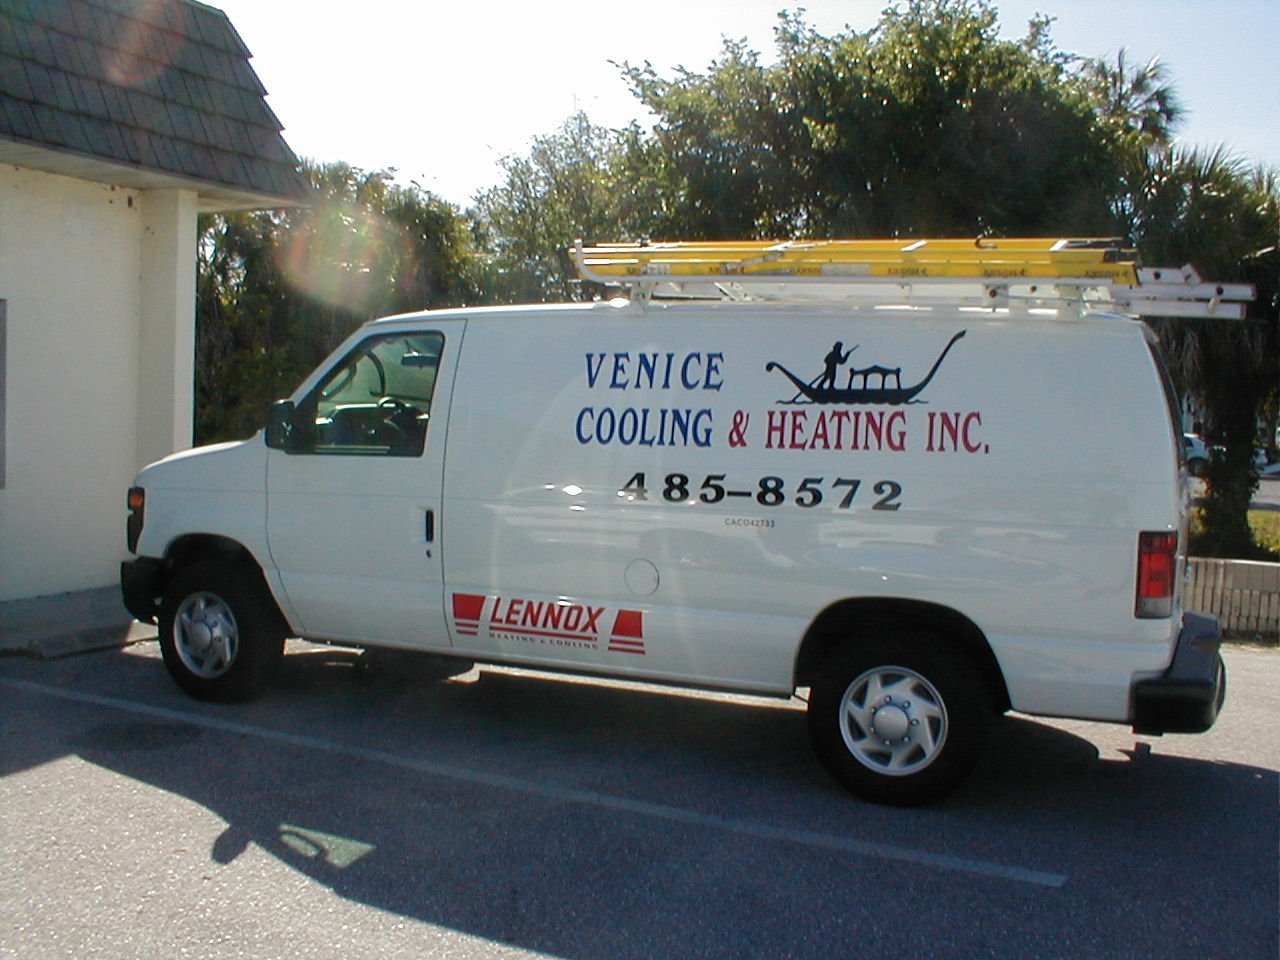 Venice Cooling & Heating Inc